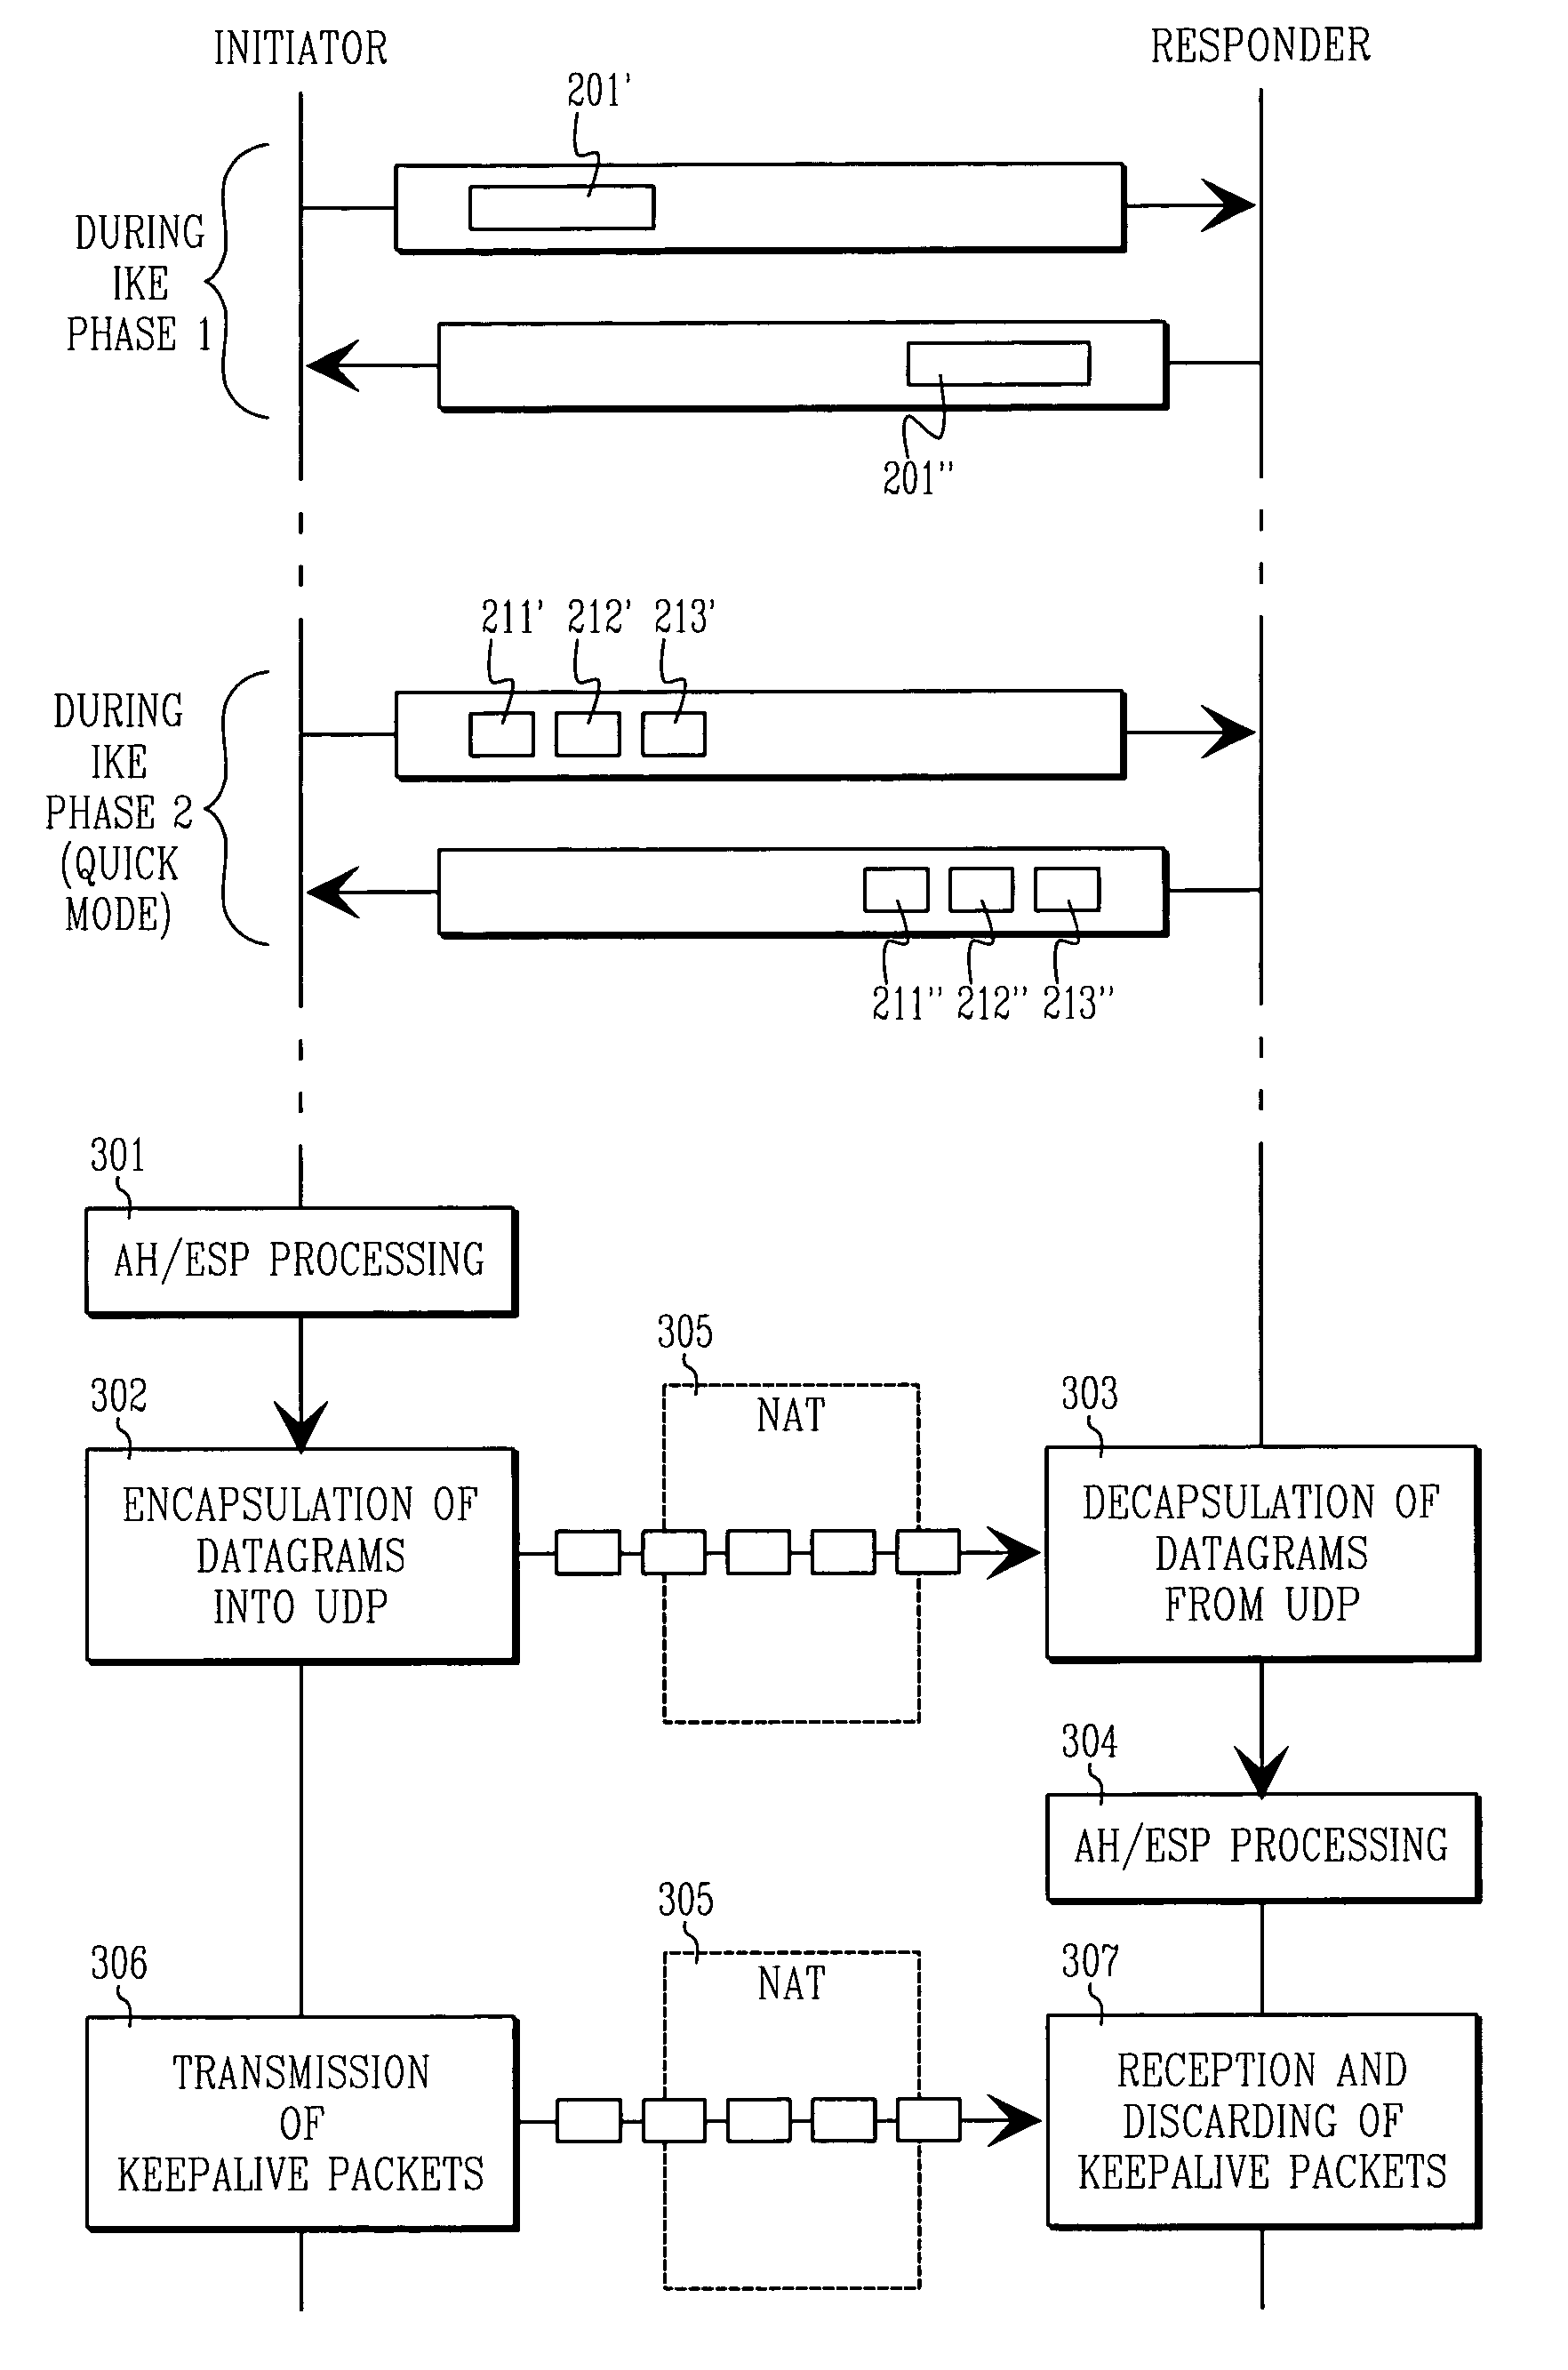 Method and arrangement for providing security through network address translations using tunneling and compensations